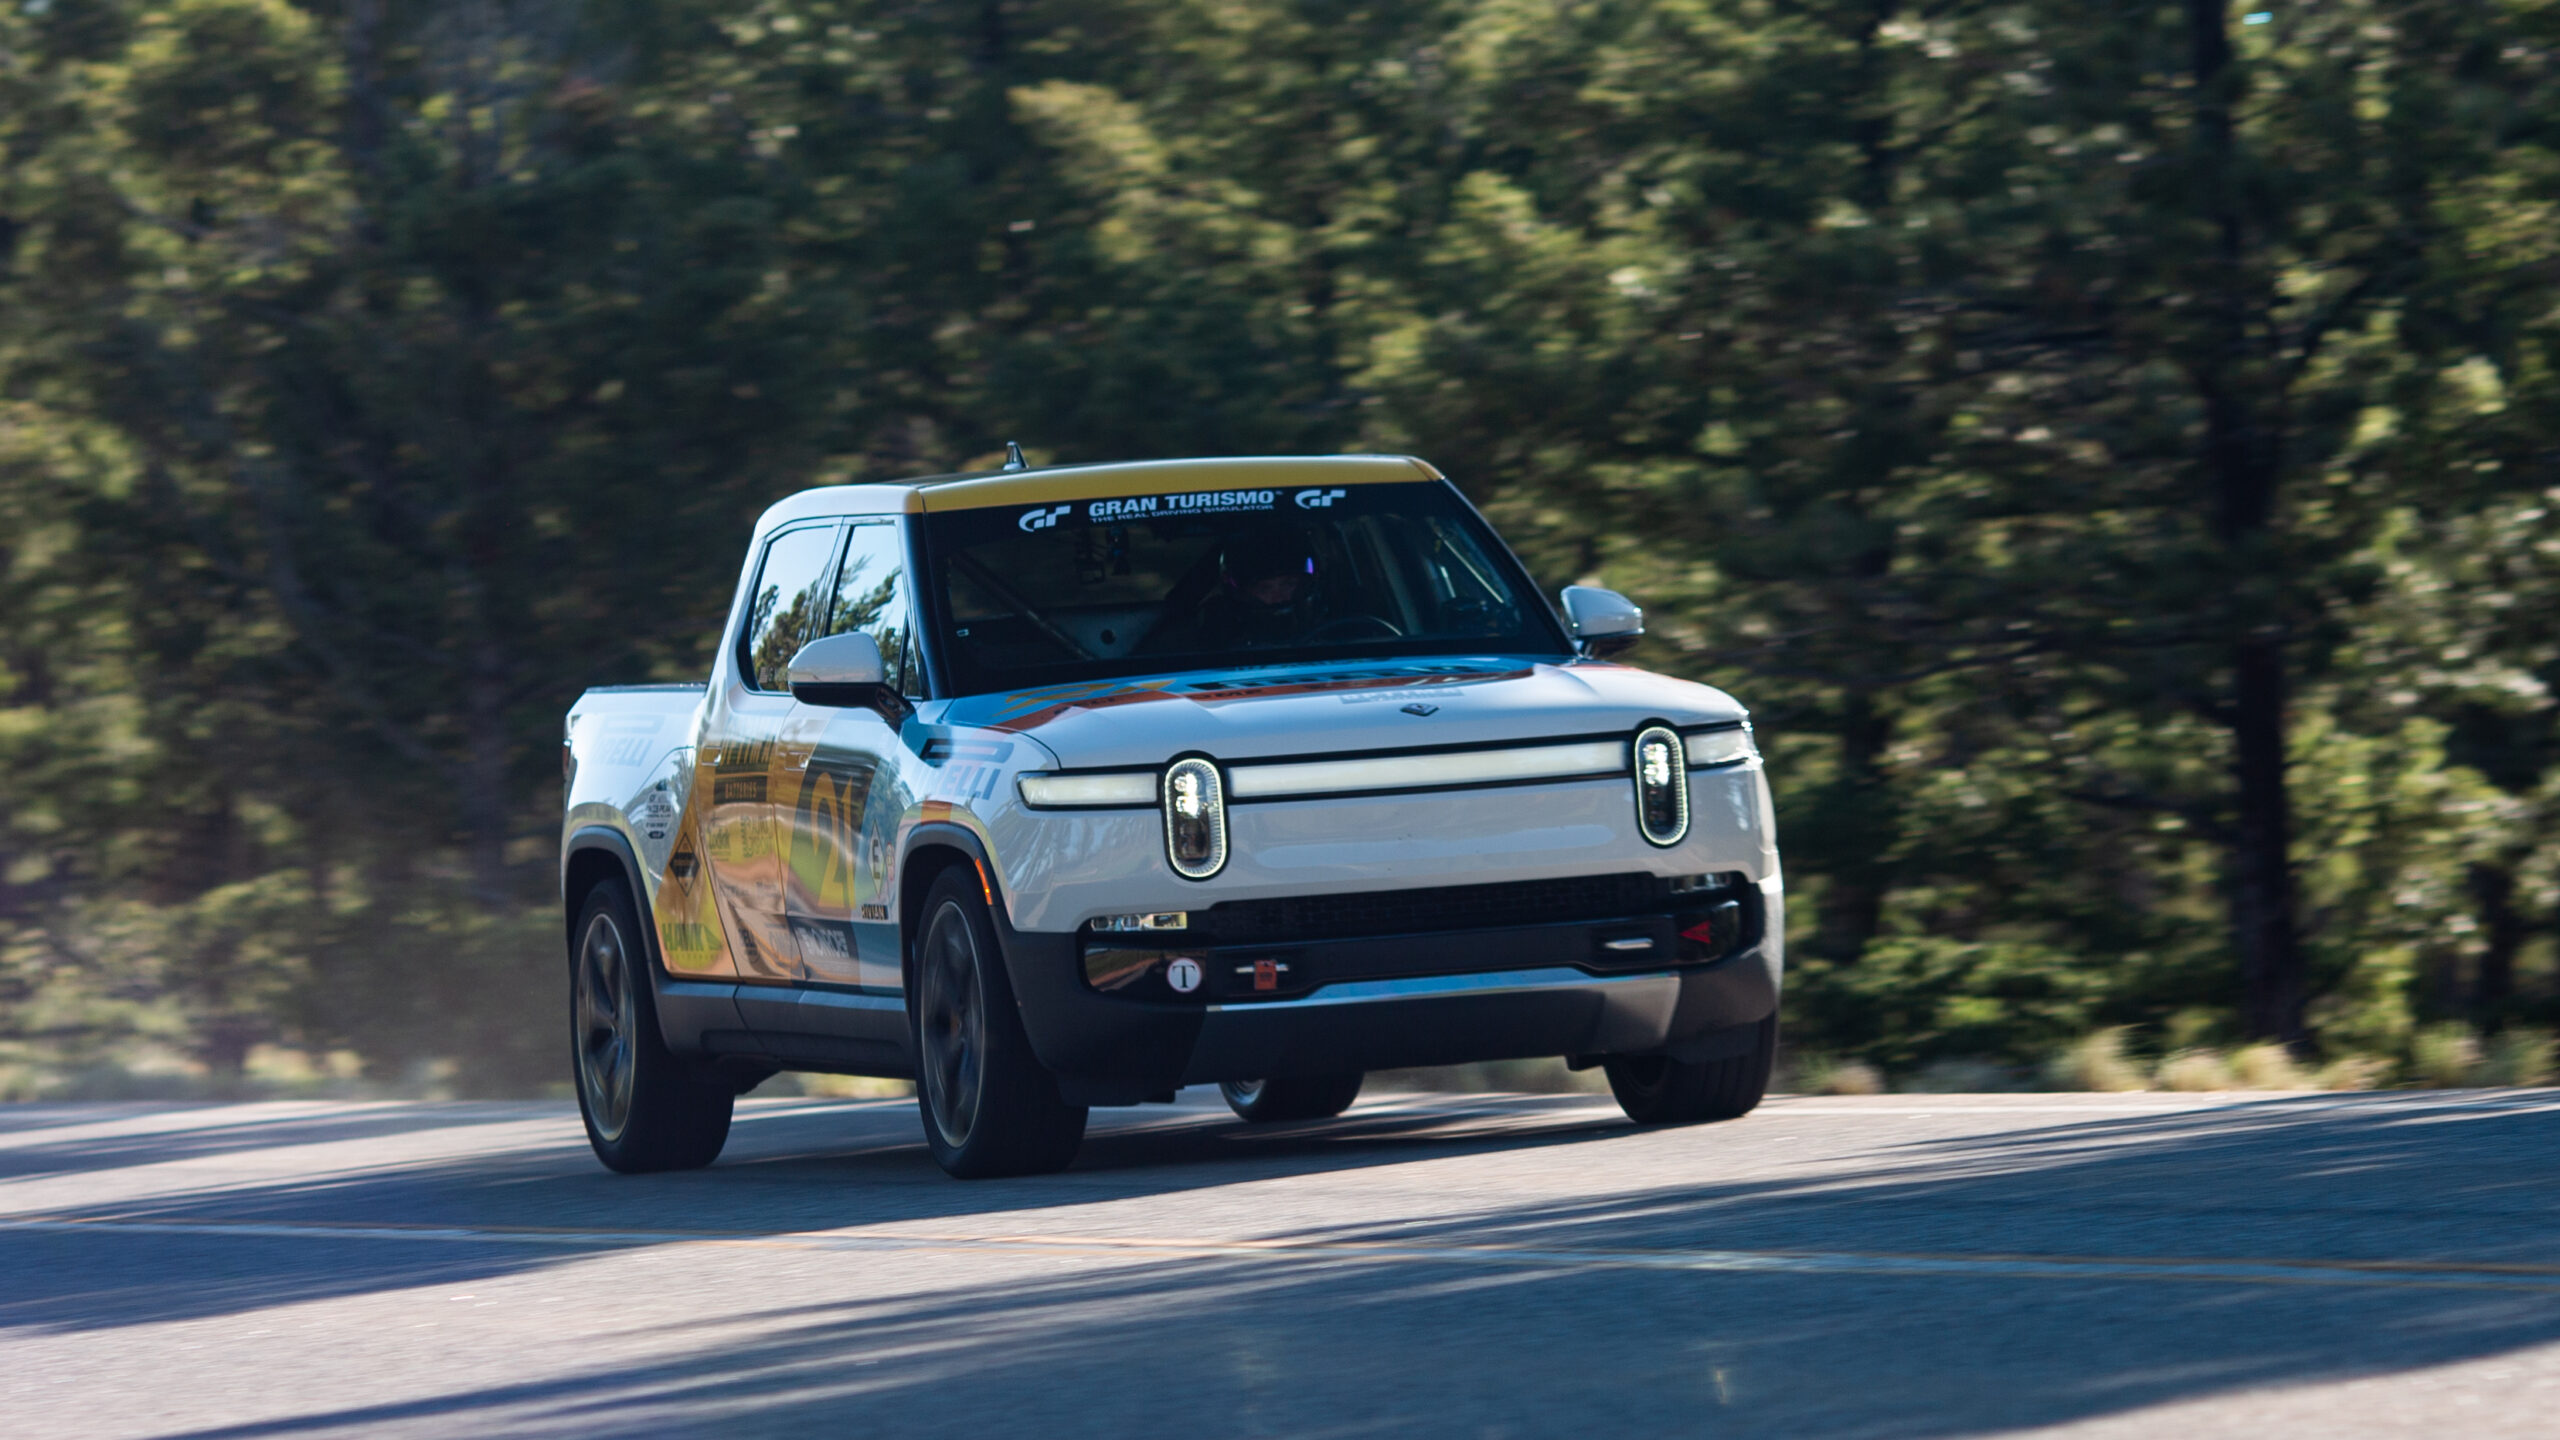 The Rivian R1T embarks on its inaugural race at Pikes Peak